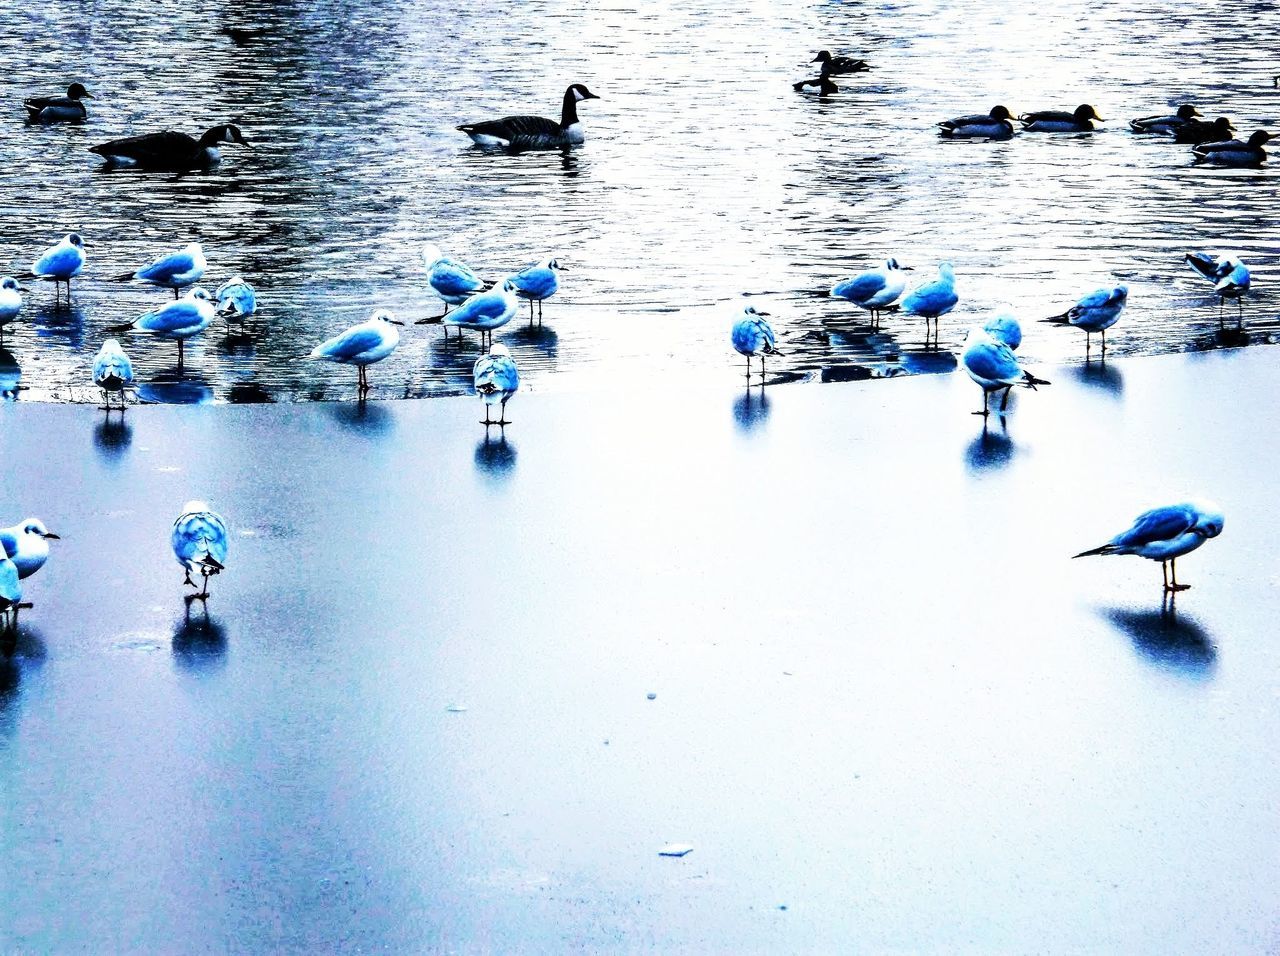 water, blue, reflection, animal themes, group of animals, wildlife, animal wildlife, bird, animal, nature, day, high angle view, no people, duck, swimming, lake, large group of animals, outdoors, beauty in nature, water bird, waterfront